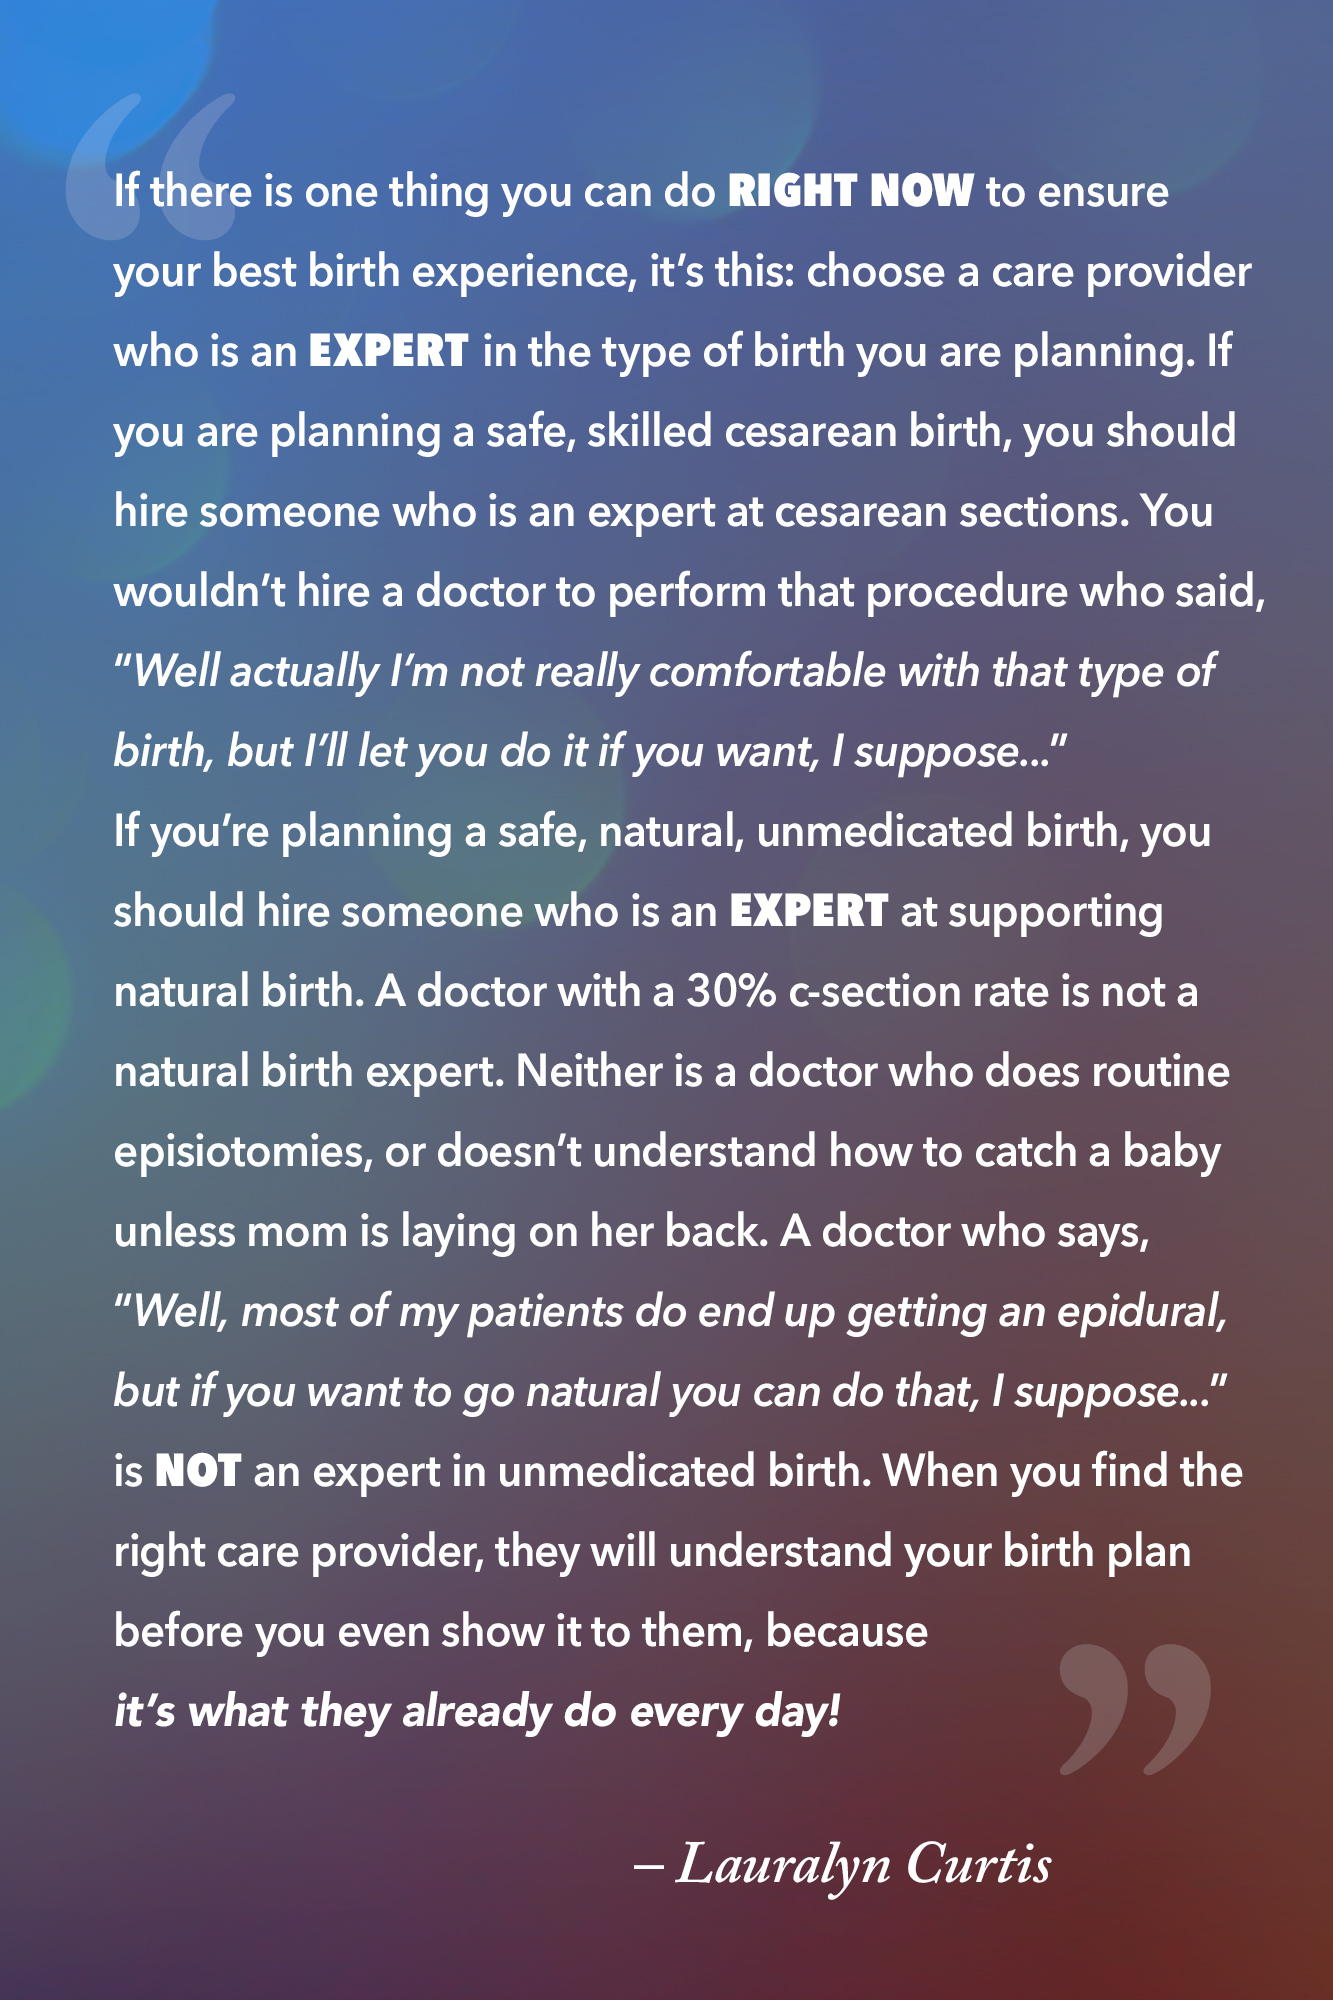 If there is one thing you can do RIGHT NOW to ensure your best birth experience, it’s this Choose a care provider who is an EXPERT in the type of birth you are planning.... Lauralyn Curtis